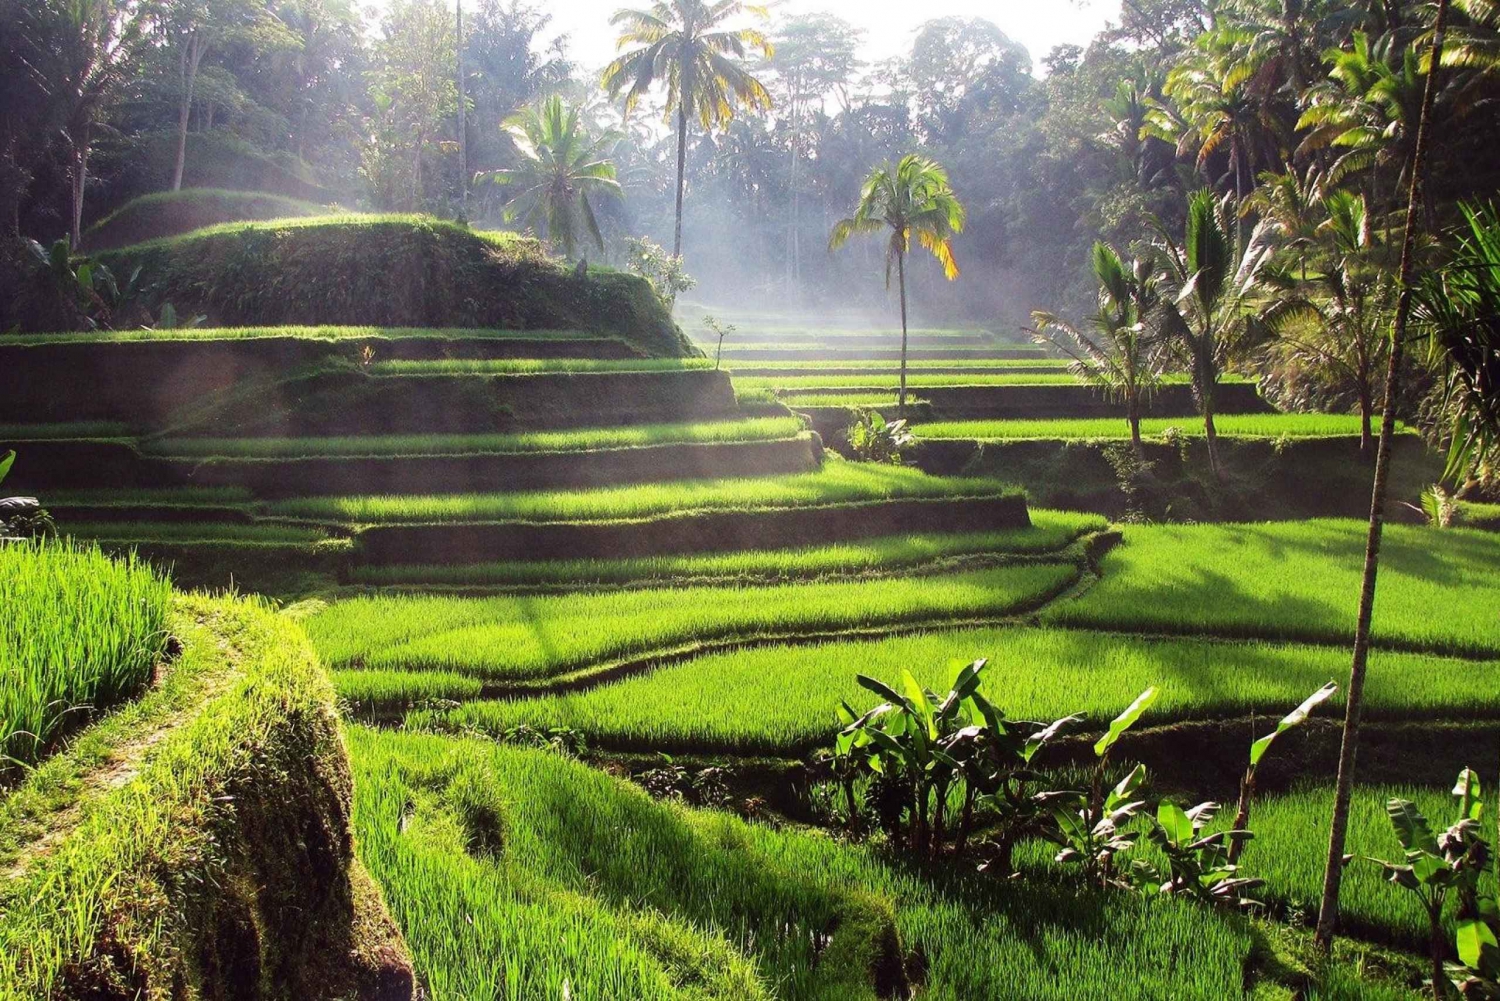 Bali: 3 Waterfalls and Tegalalang Rice Terrace Private Tour